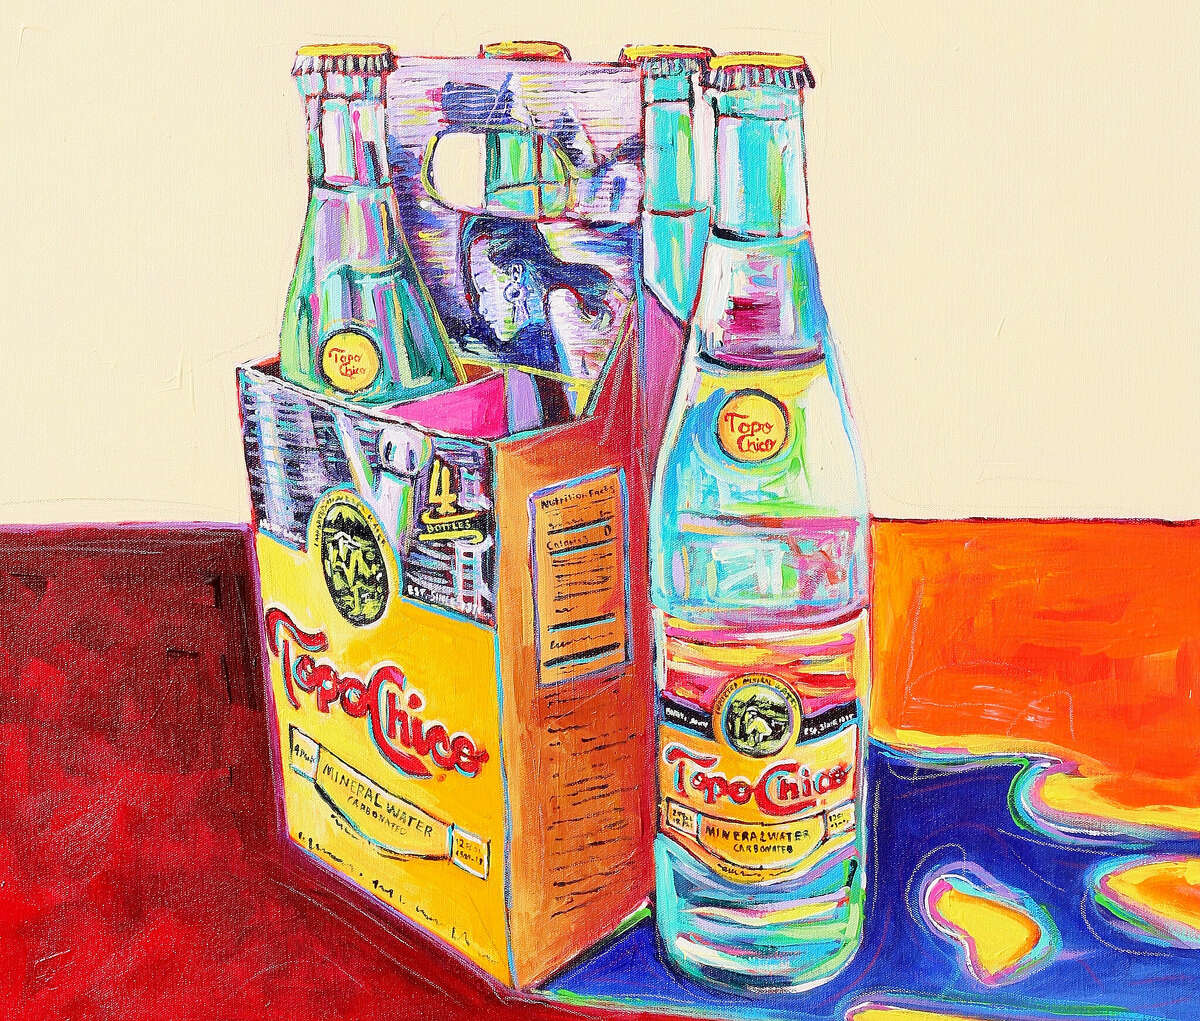 A Topo Chico still life by San Antonio artist Martin Emmanuel Rangel, who goes by Emmanuel for his art. The Mexican mineral water is so popular artists such as Rangel celebrate it in paintings as well as custom glassware and jewelry.